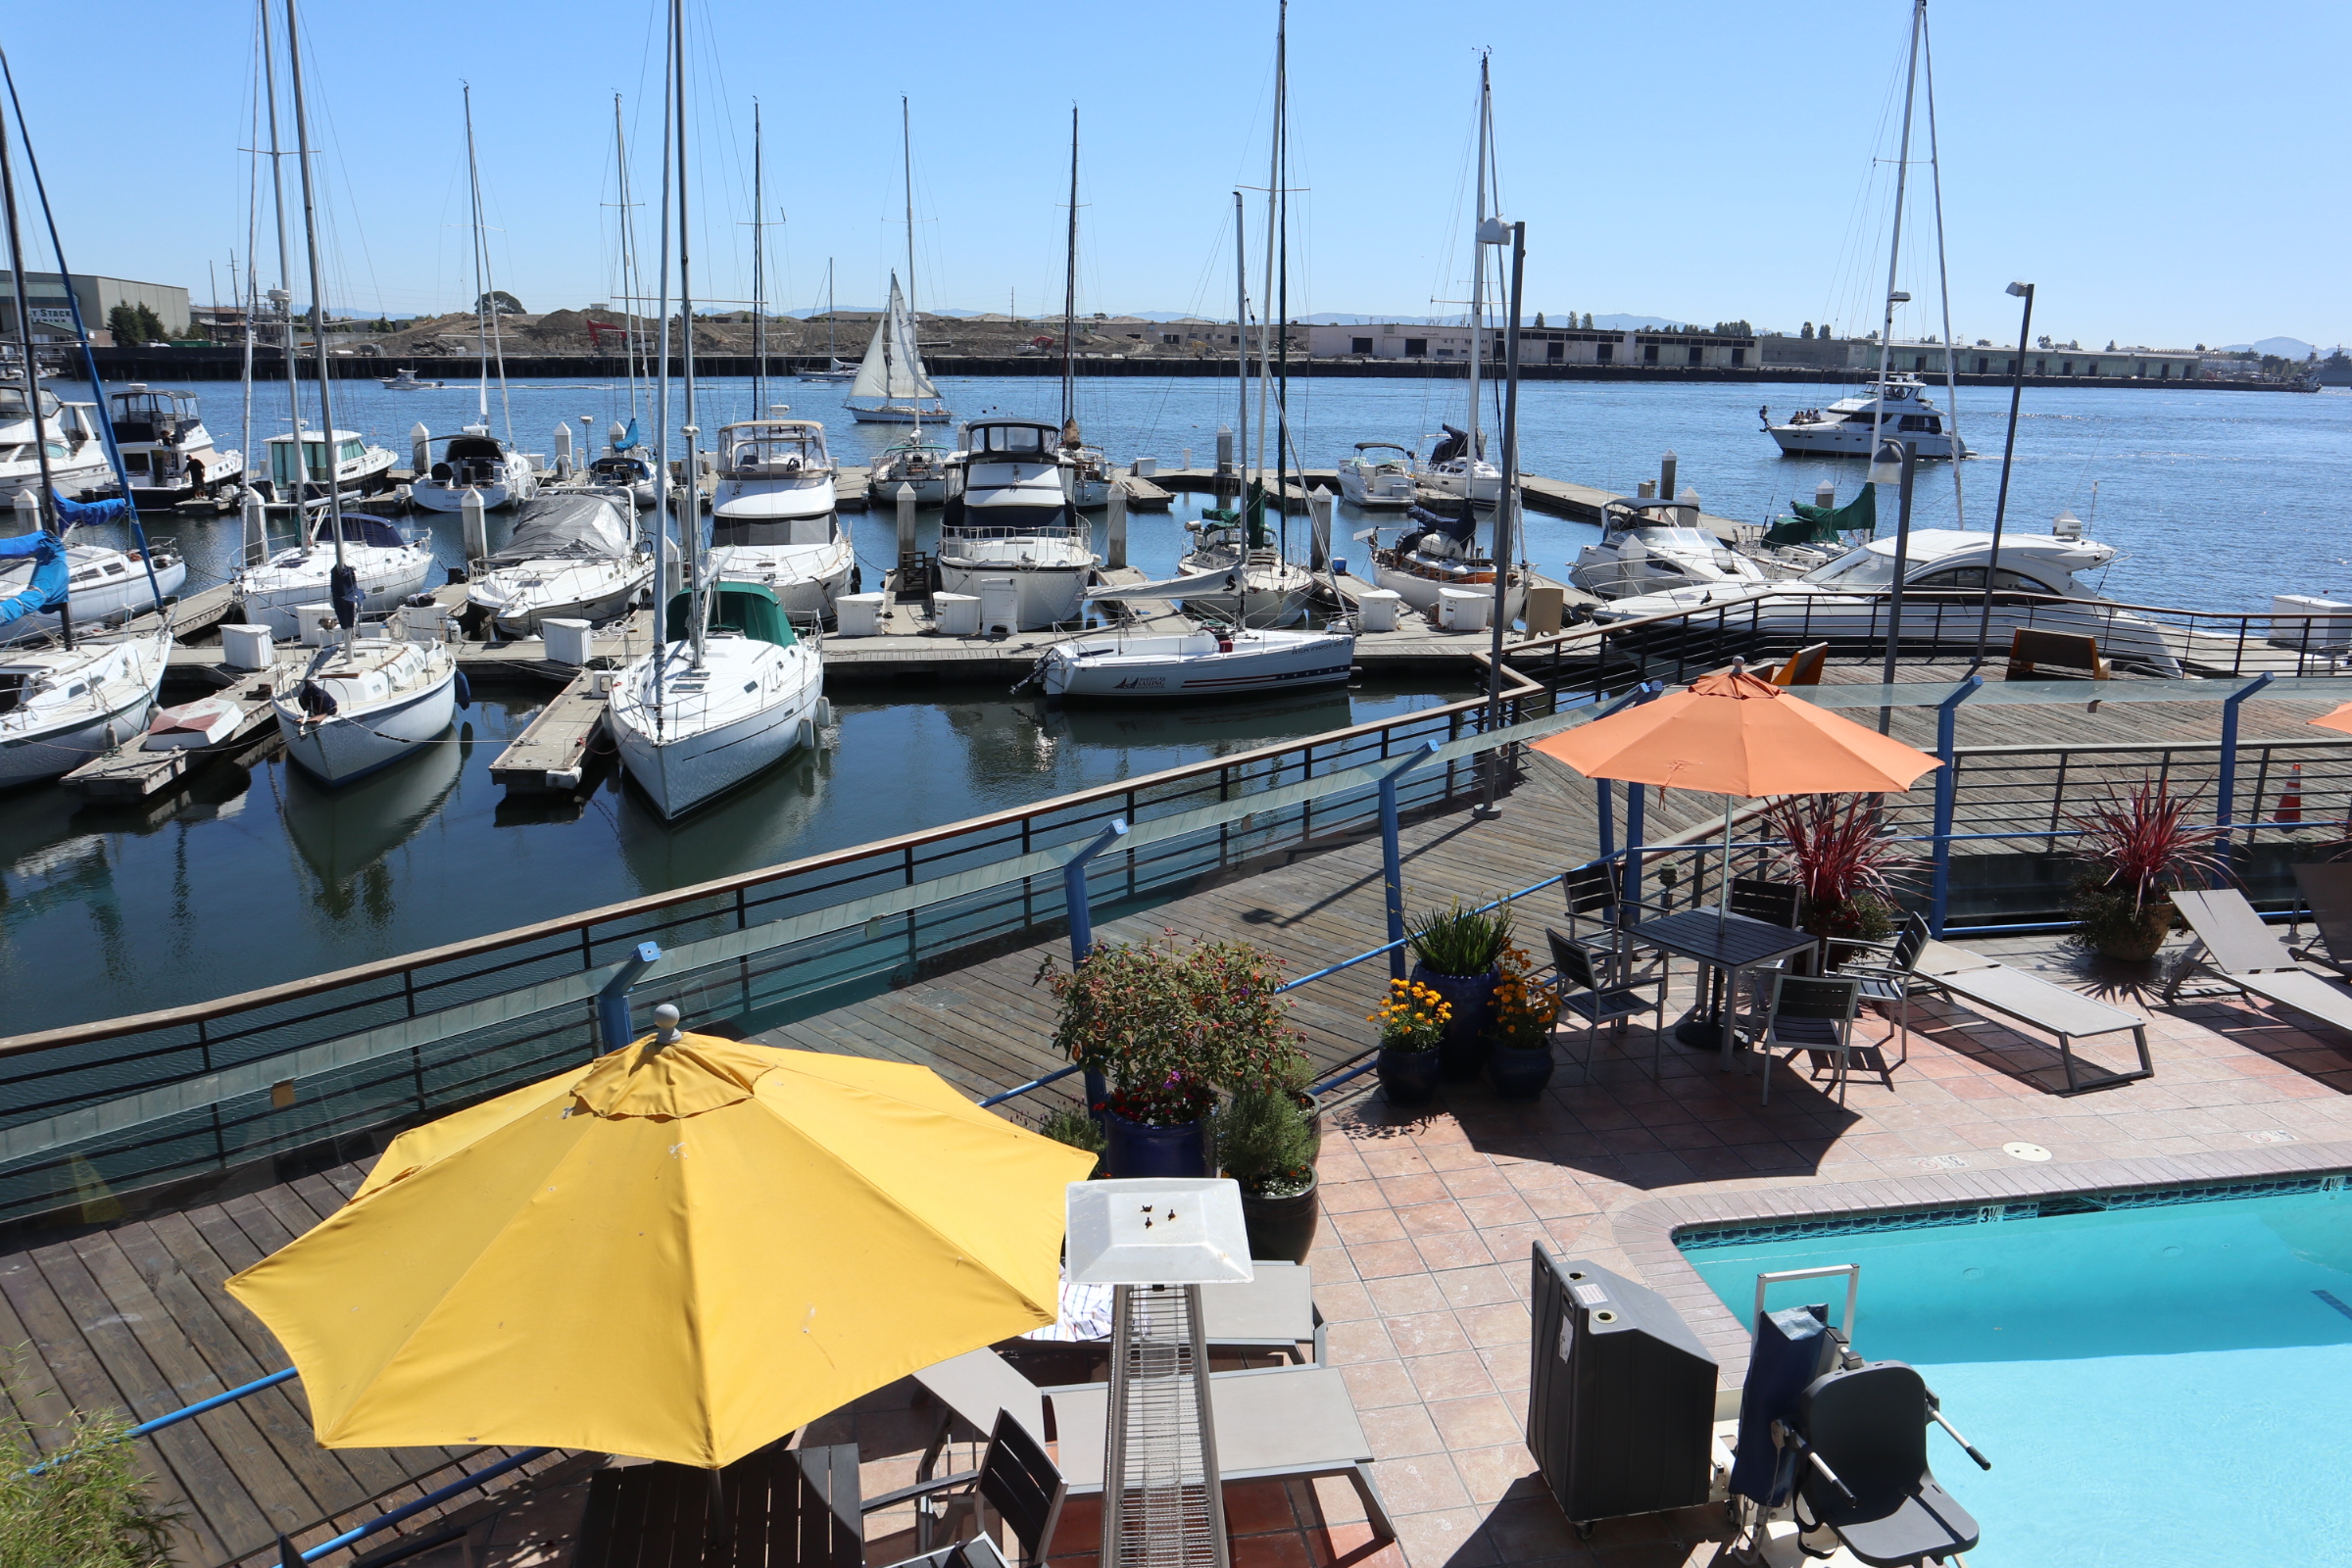 Visiting Oakland? There’s No Better Place to Stay Than the Waterfront Hotel